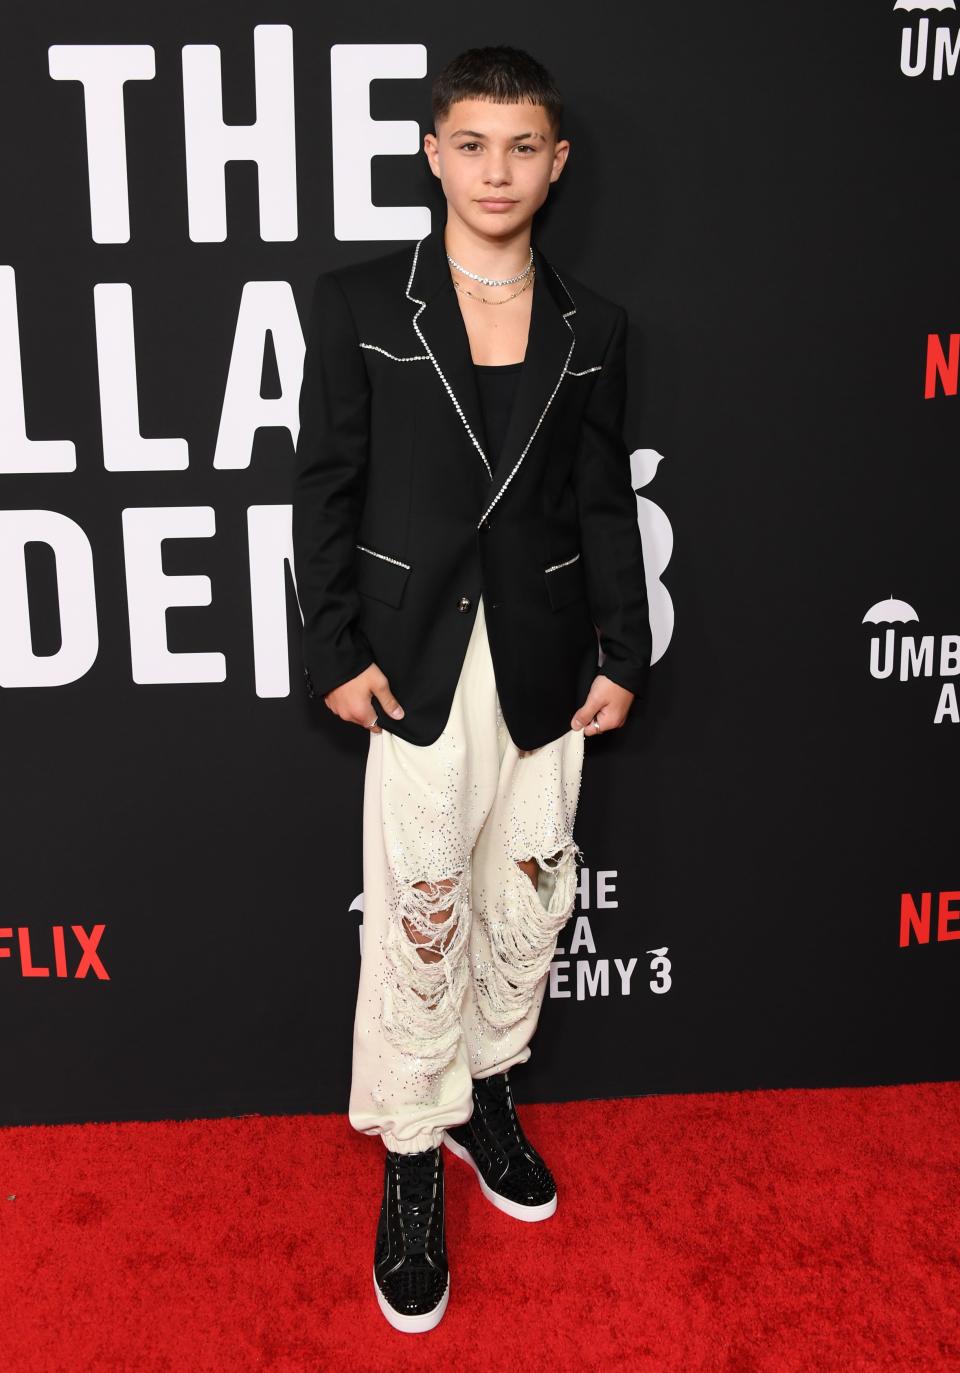 Javon in a black blazer with silver crystals along stitch lines, the collar, and pockets. He's wearing cream jogger pants with rips and crystals along with black sneakers.